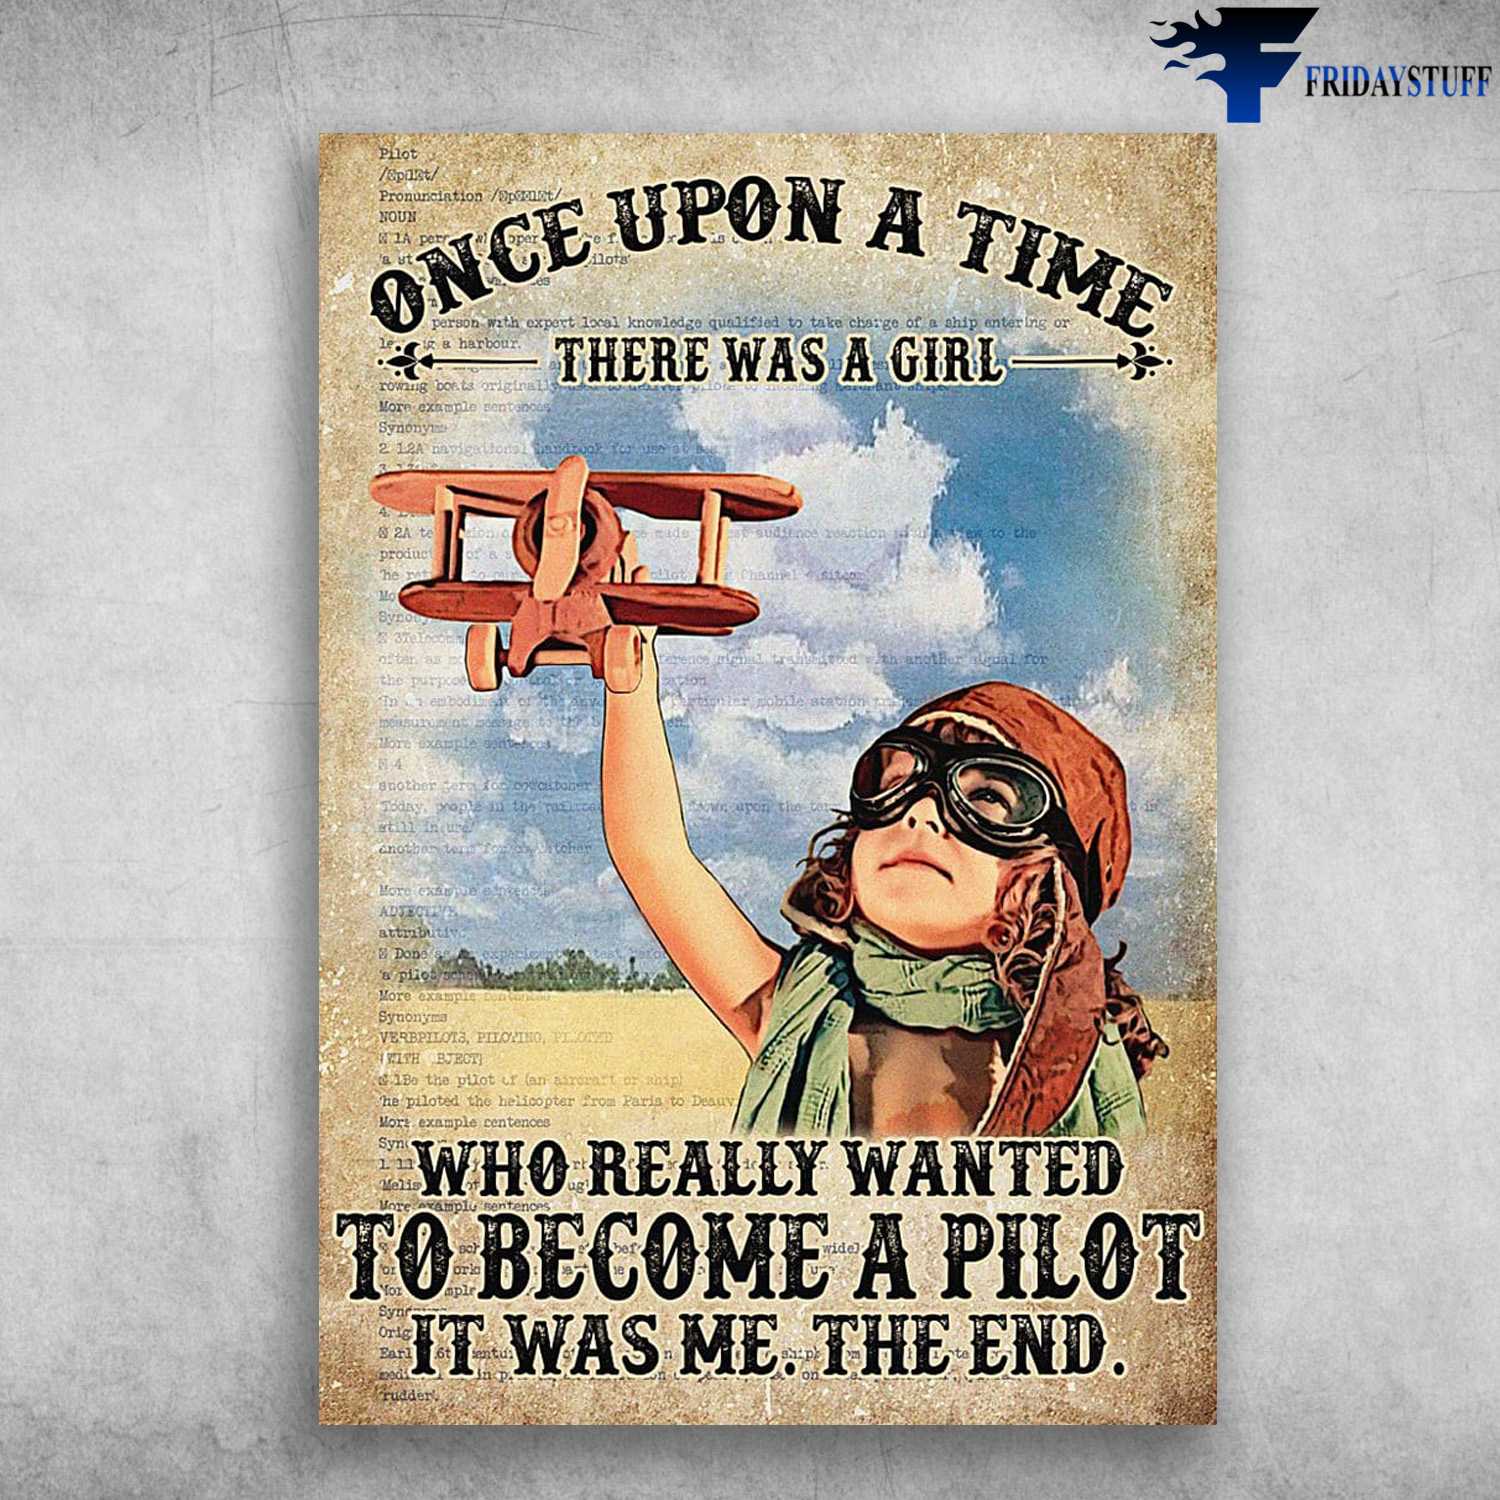 Pilot Lover, Pilot Girl, Once Upon A Time, There Was A Girl, Who Really Wanted To Become A Pilot, It Was Me, The End